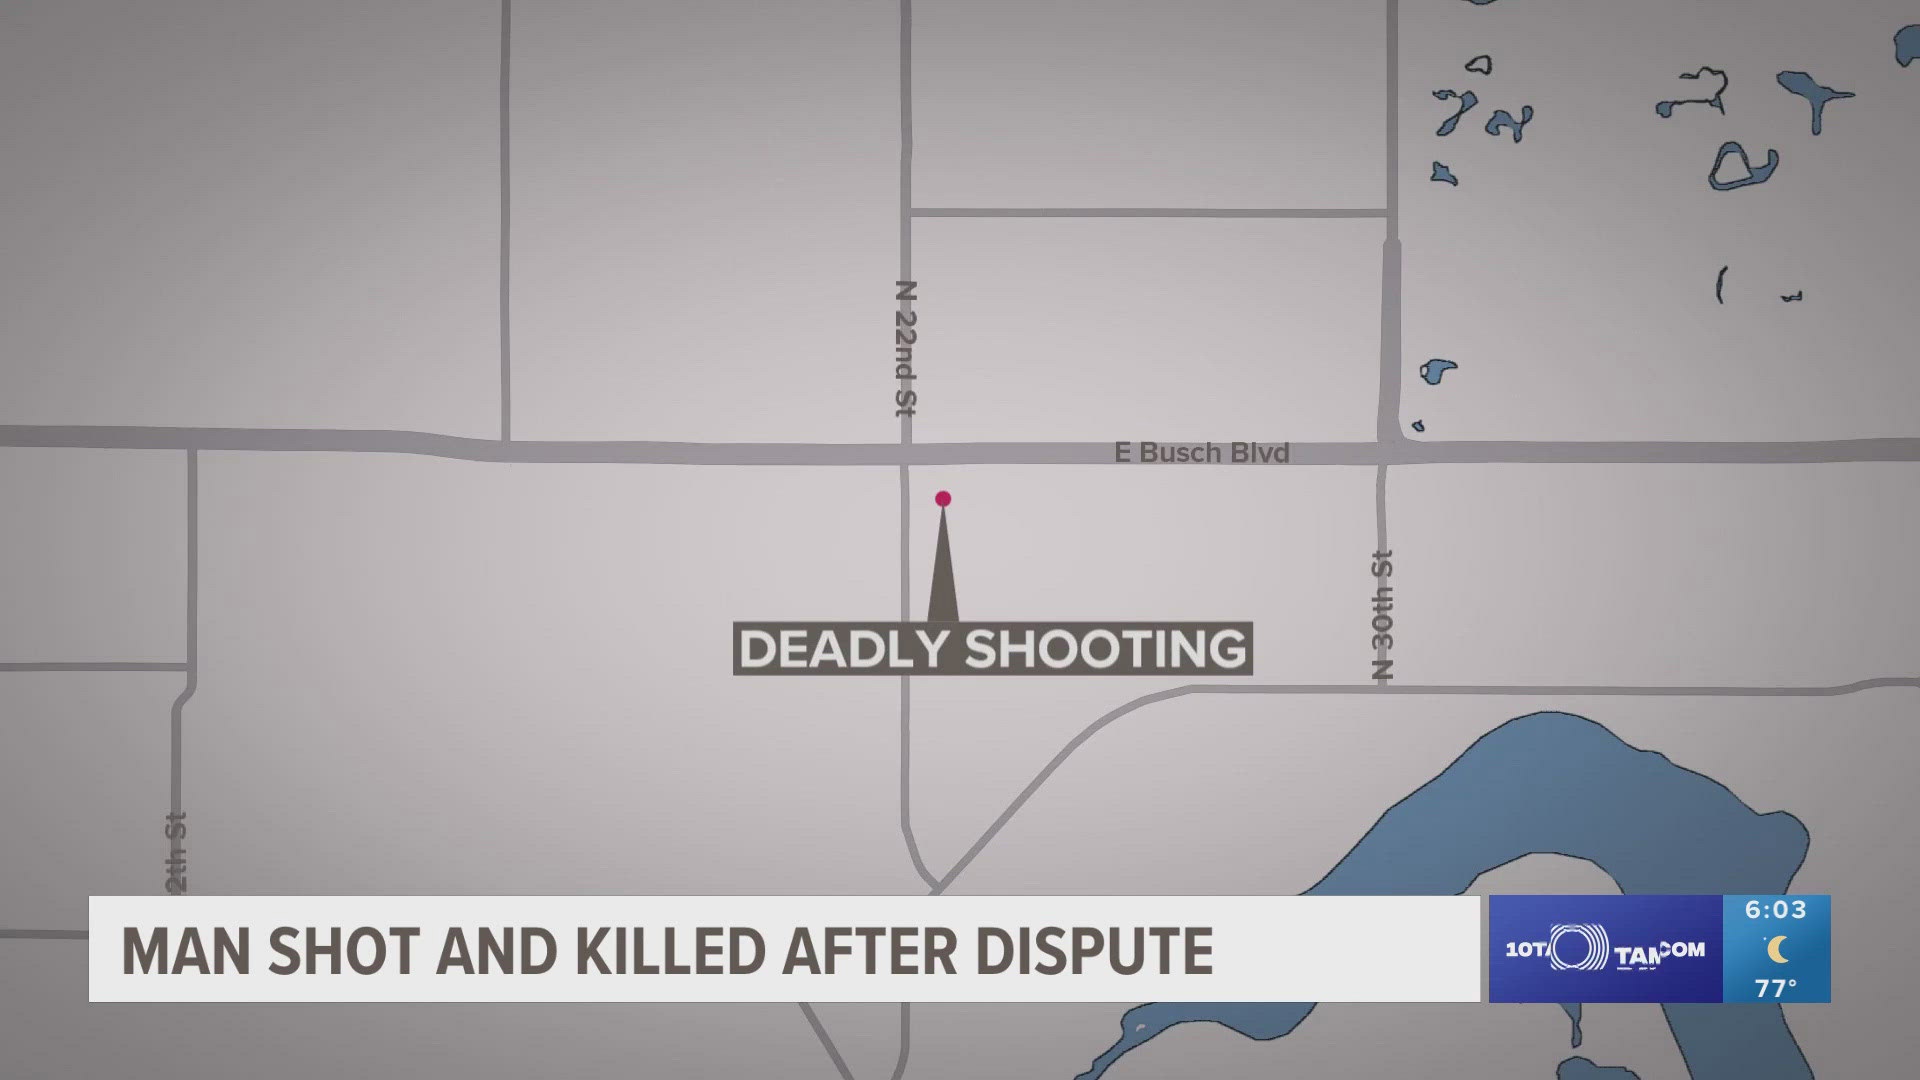 One person was killed after being shot and Tampa Police are looking for the other person involved in the incident.